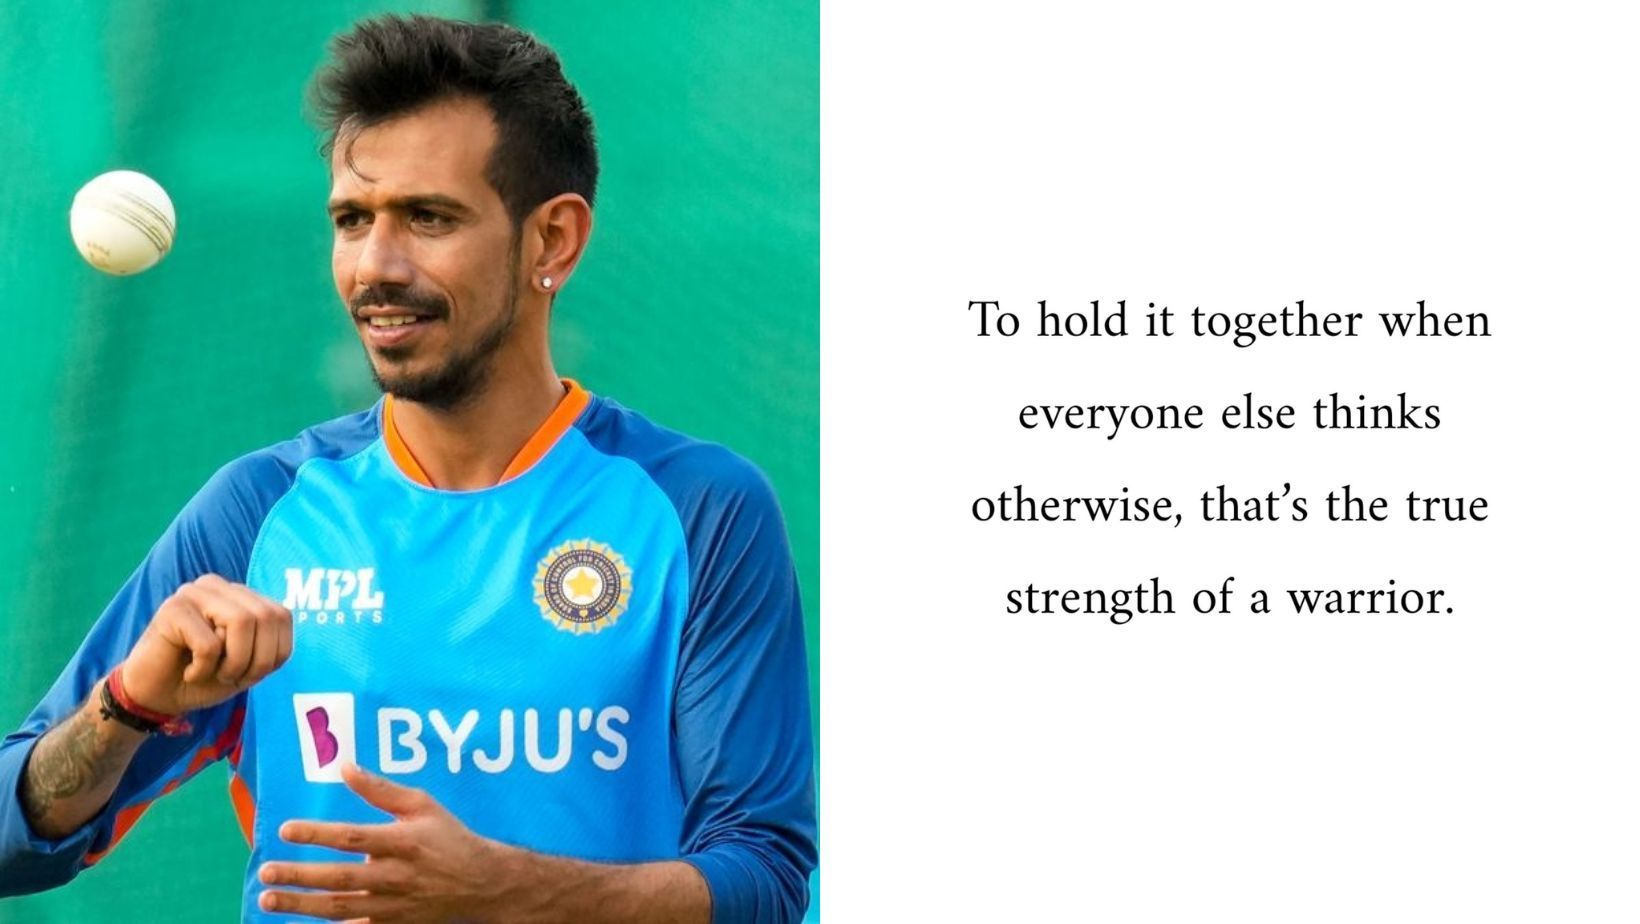 Yuzvendra Chahal (L) shared the motivational quote (R) on X.